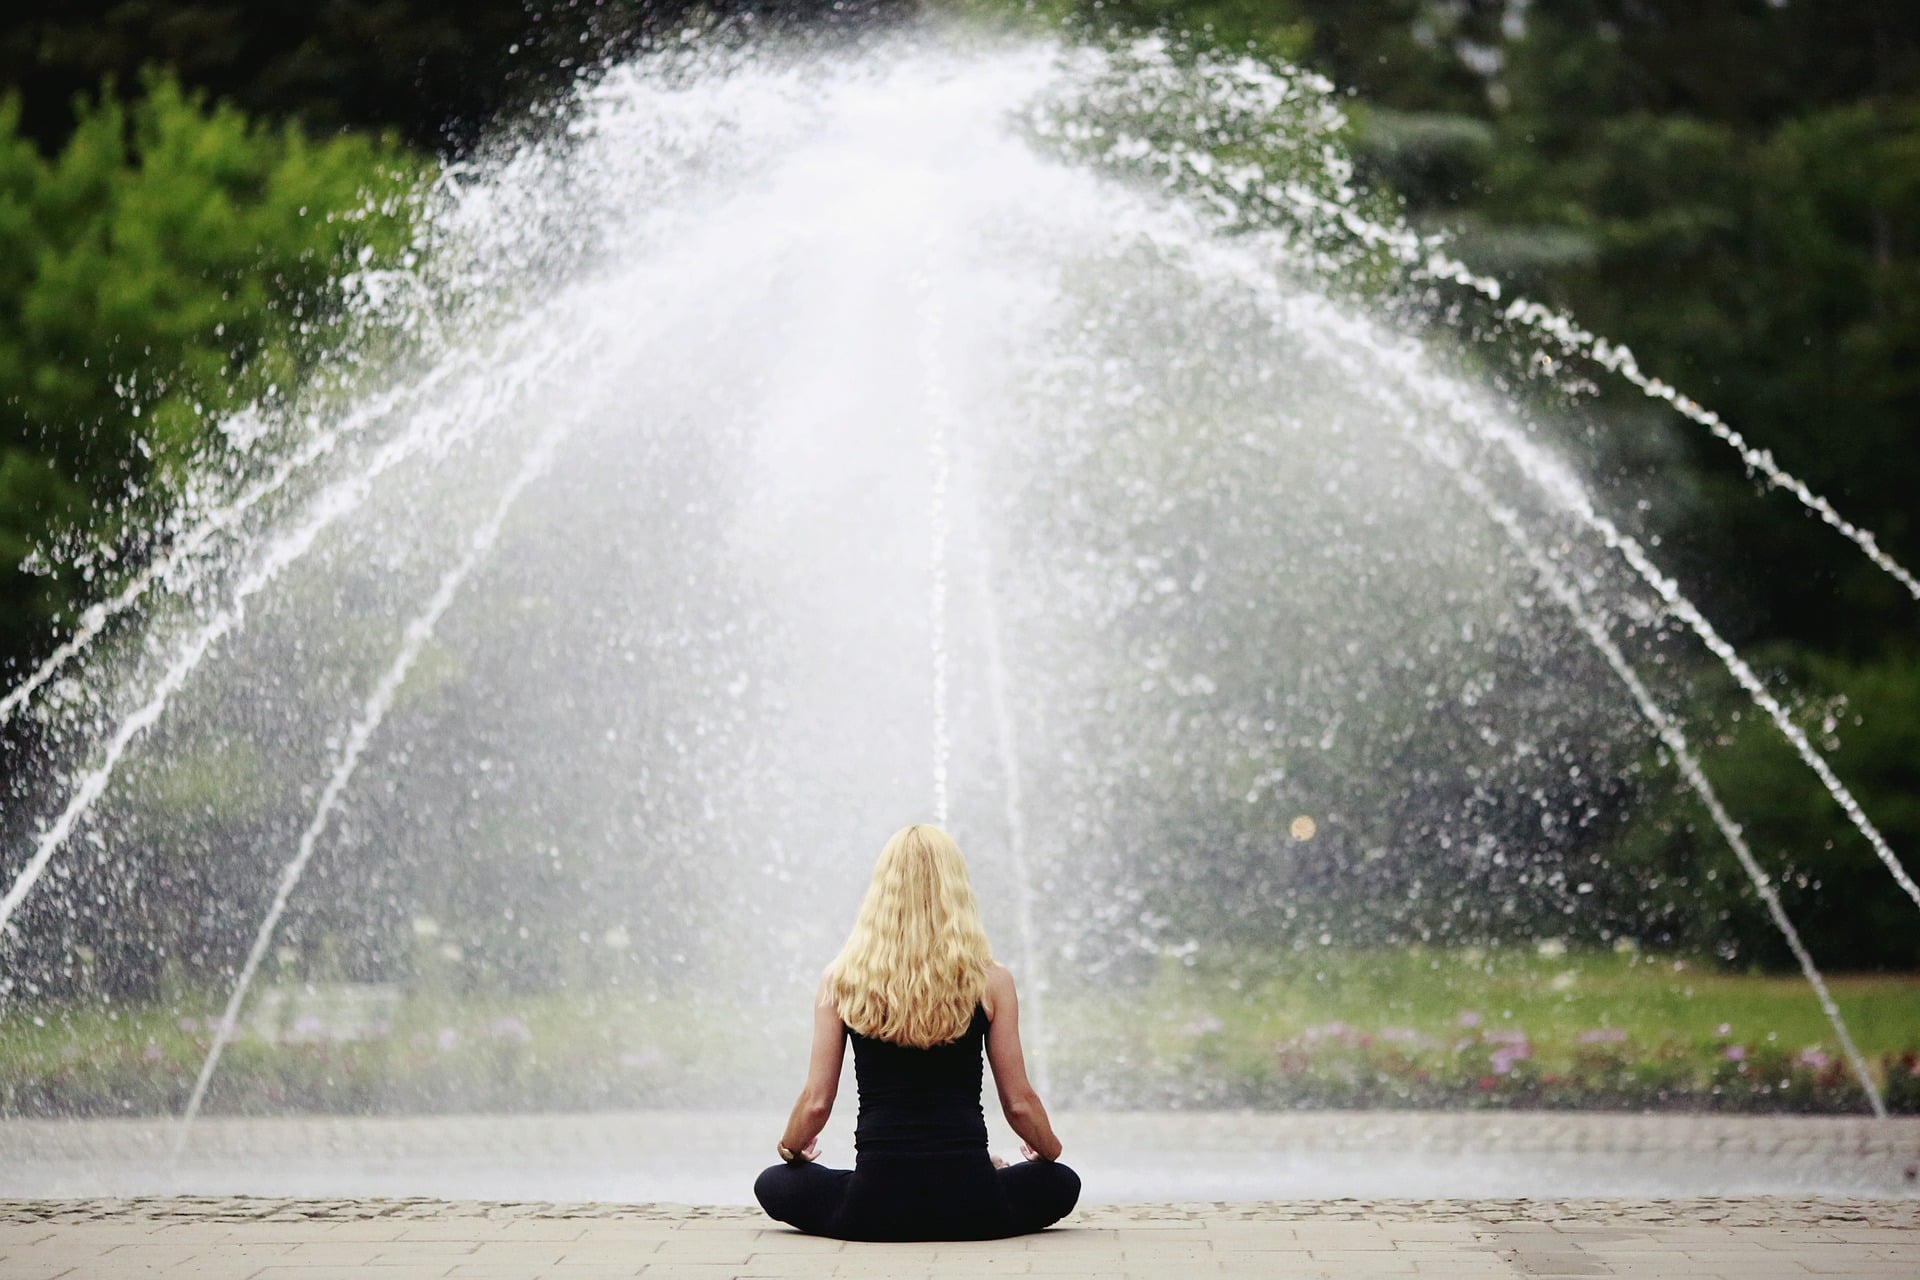 A girl is meditating in front of water fountain